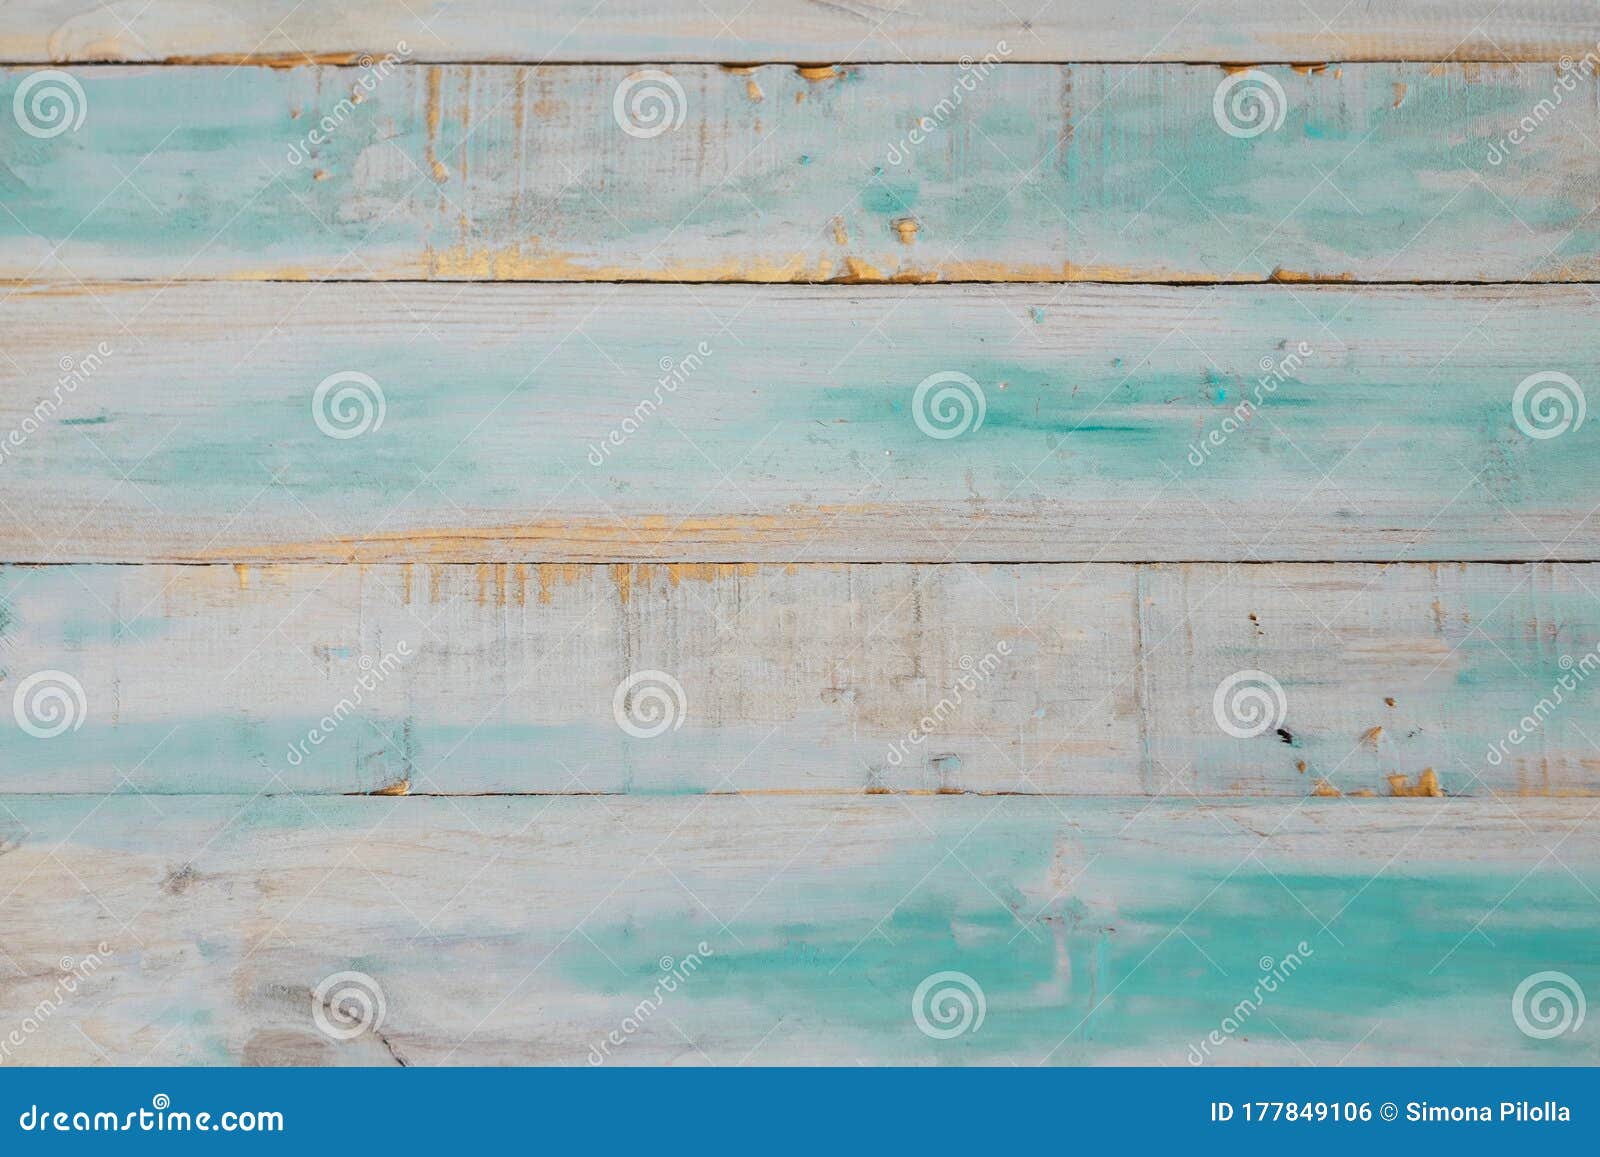 Wooden Raw Blue Background For Desktop Or Table Vintage Painted Style Wood For Aesthetic Decoration Stock Photo Image Of Paint Concept 177849106